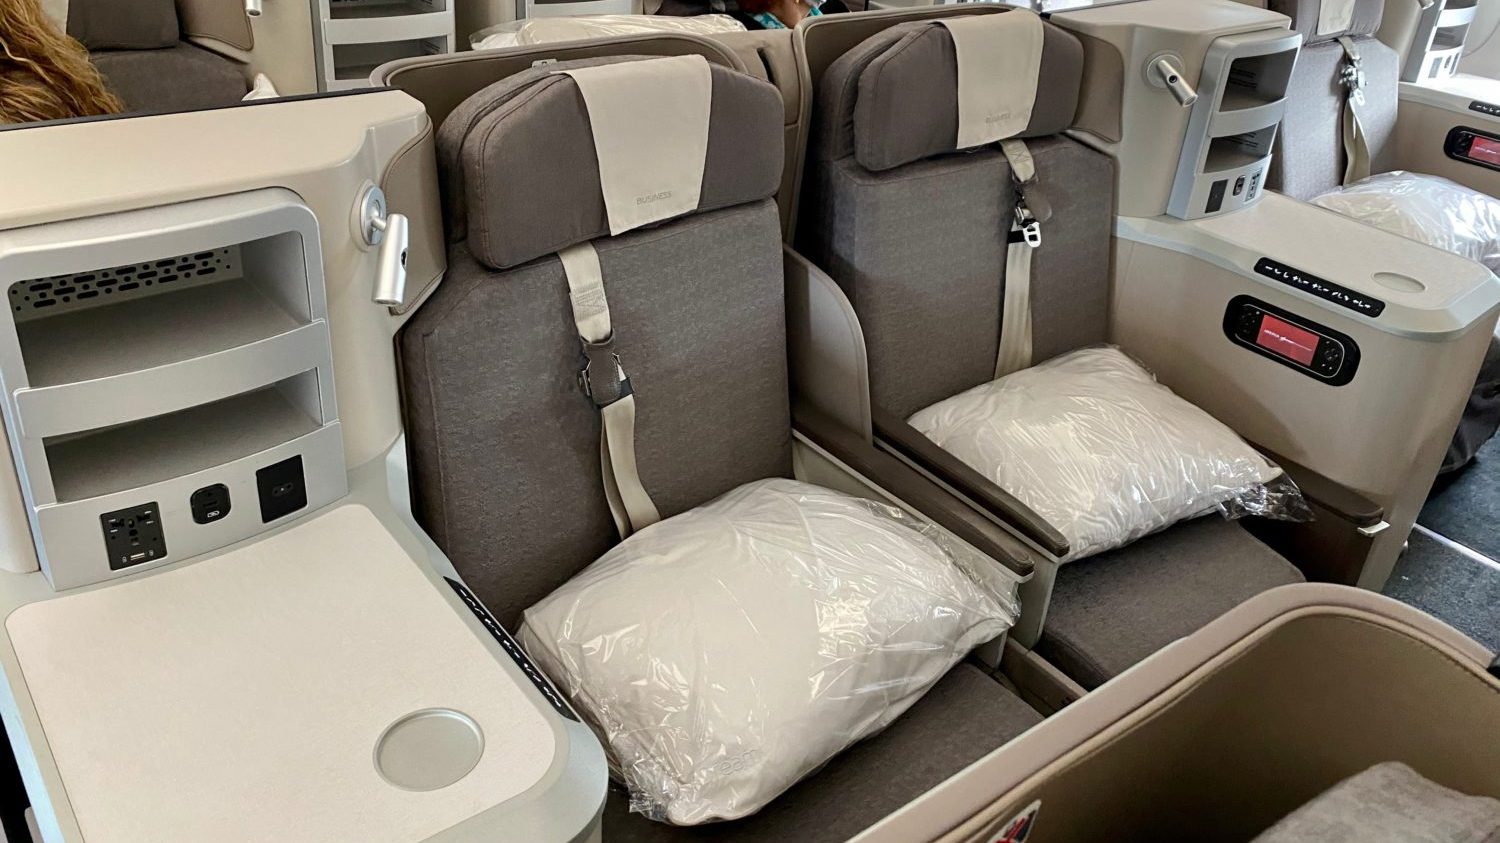 Search American Airlines for Iberia business class awards